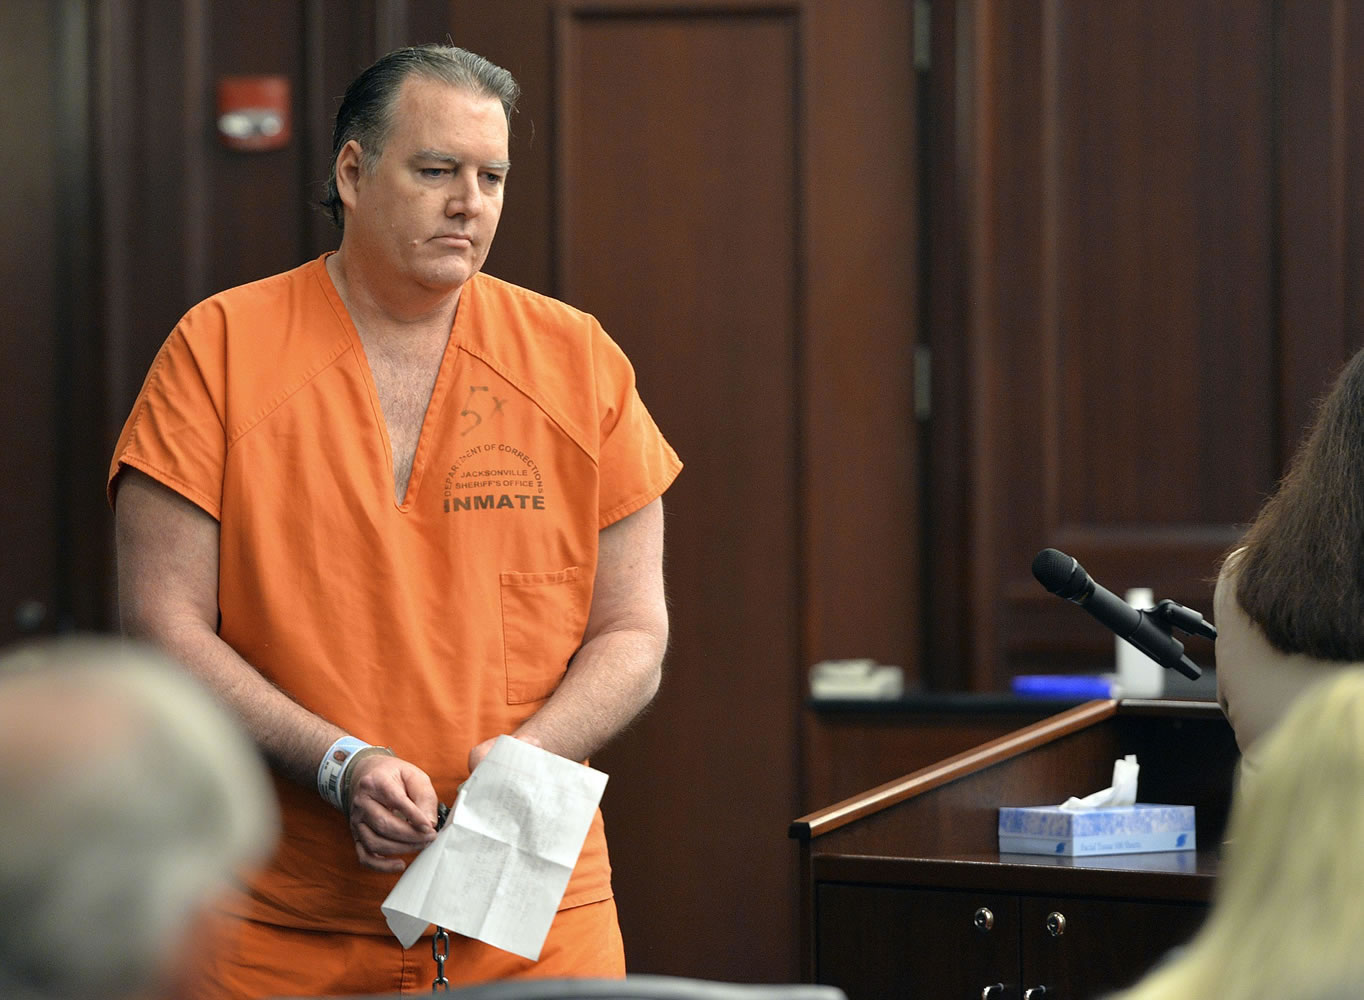 Michael Dunn returns to his seat after reading a statement, which included an apology to the victim's family, during his sentencing hearing Friday in Jacksonville, Fla.